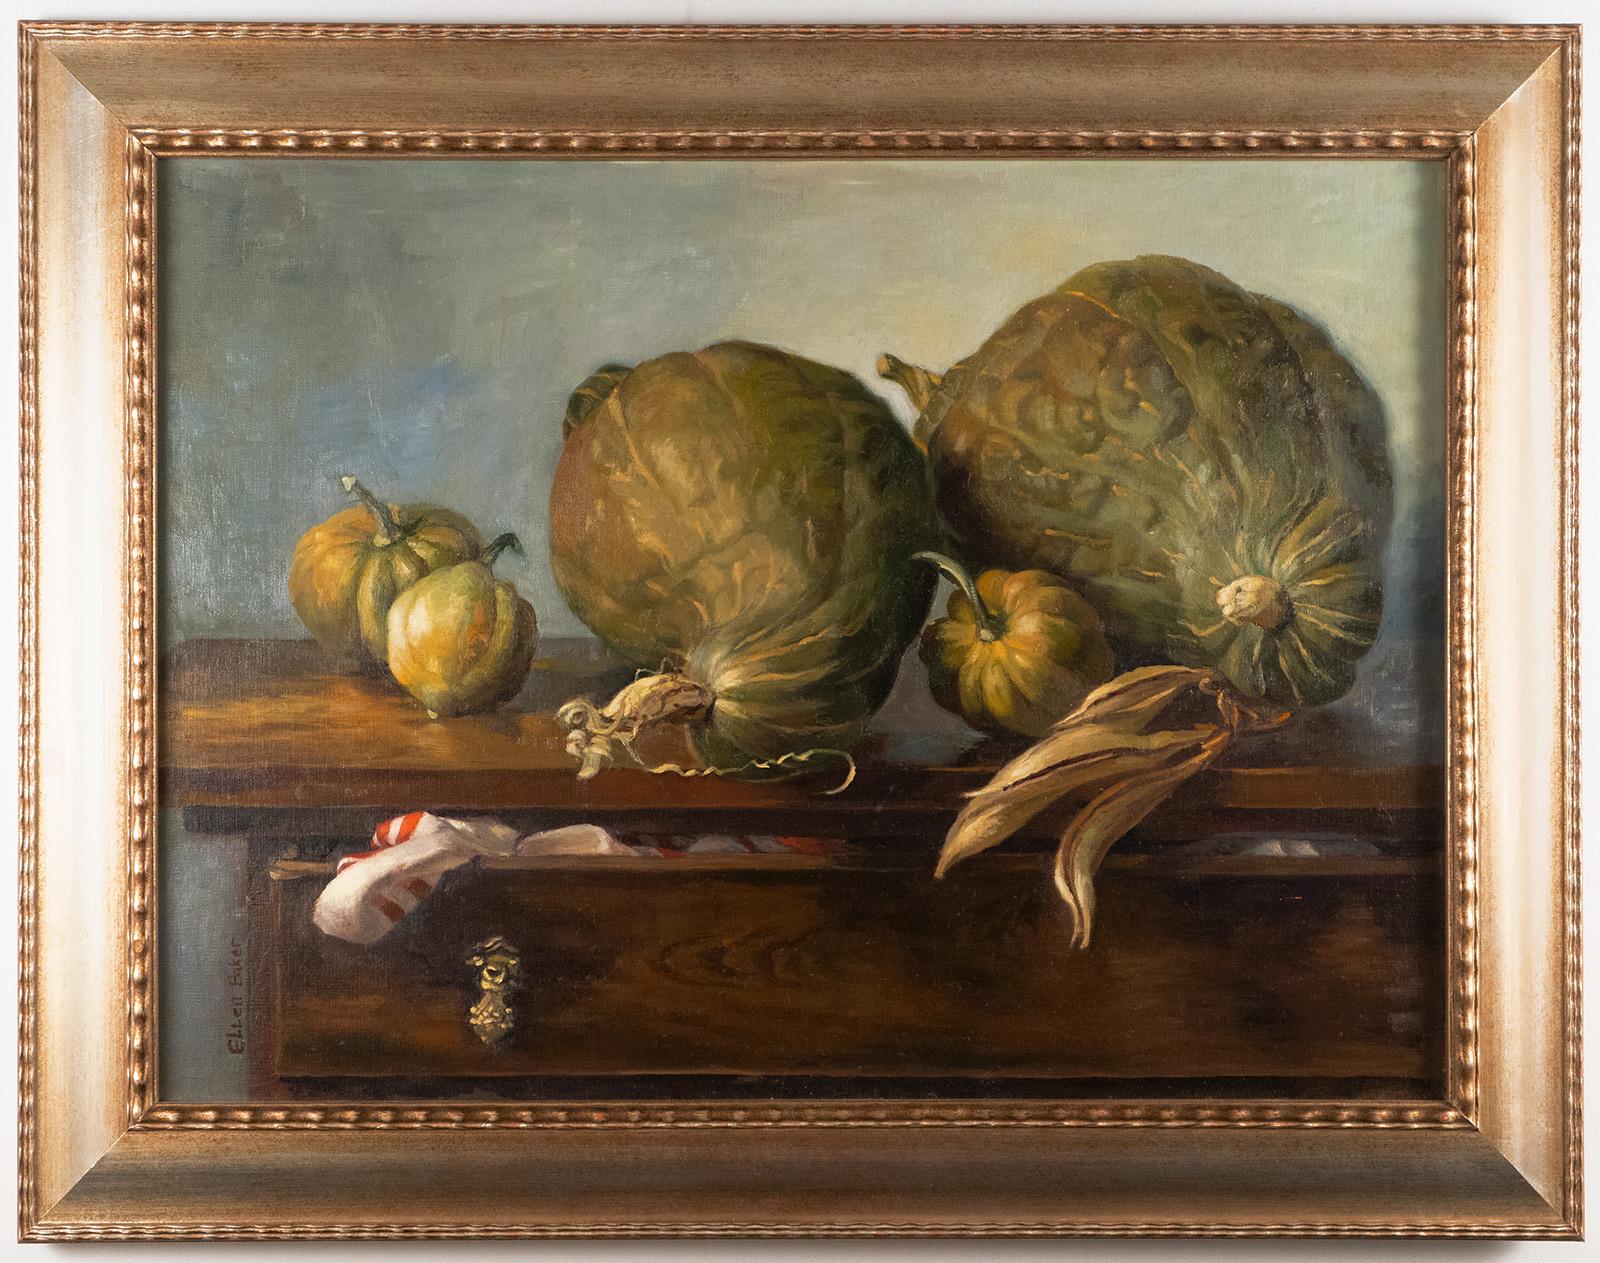 Ellen Baker (American, b. 1955)

Painting in isolation for decades, Ellen Baker has been carefully honing her skills through daily meticulous paintings of ordinary objects and seasonal produce that are pulled from her own garden. Baker works in the